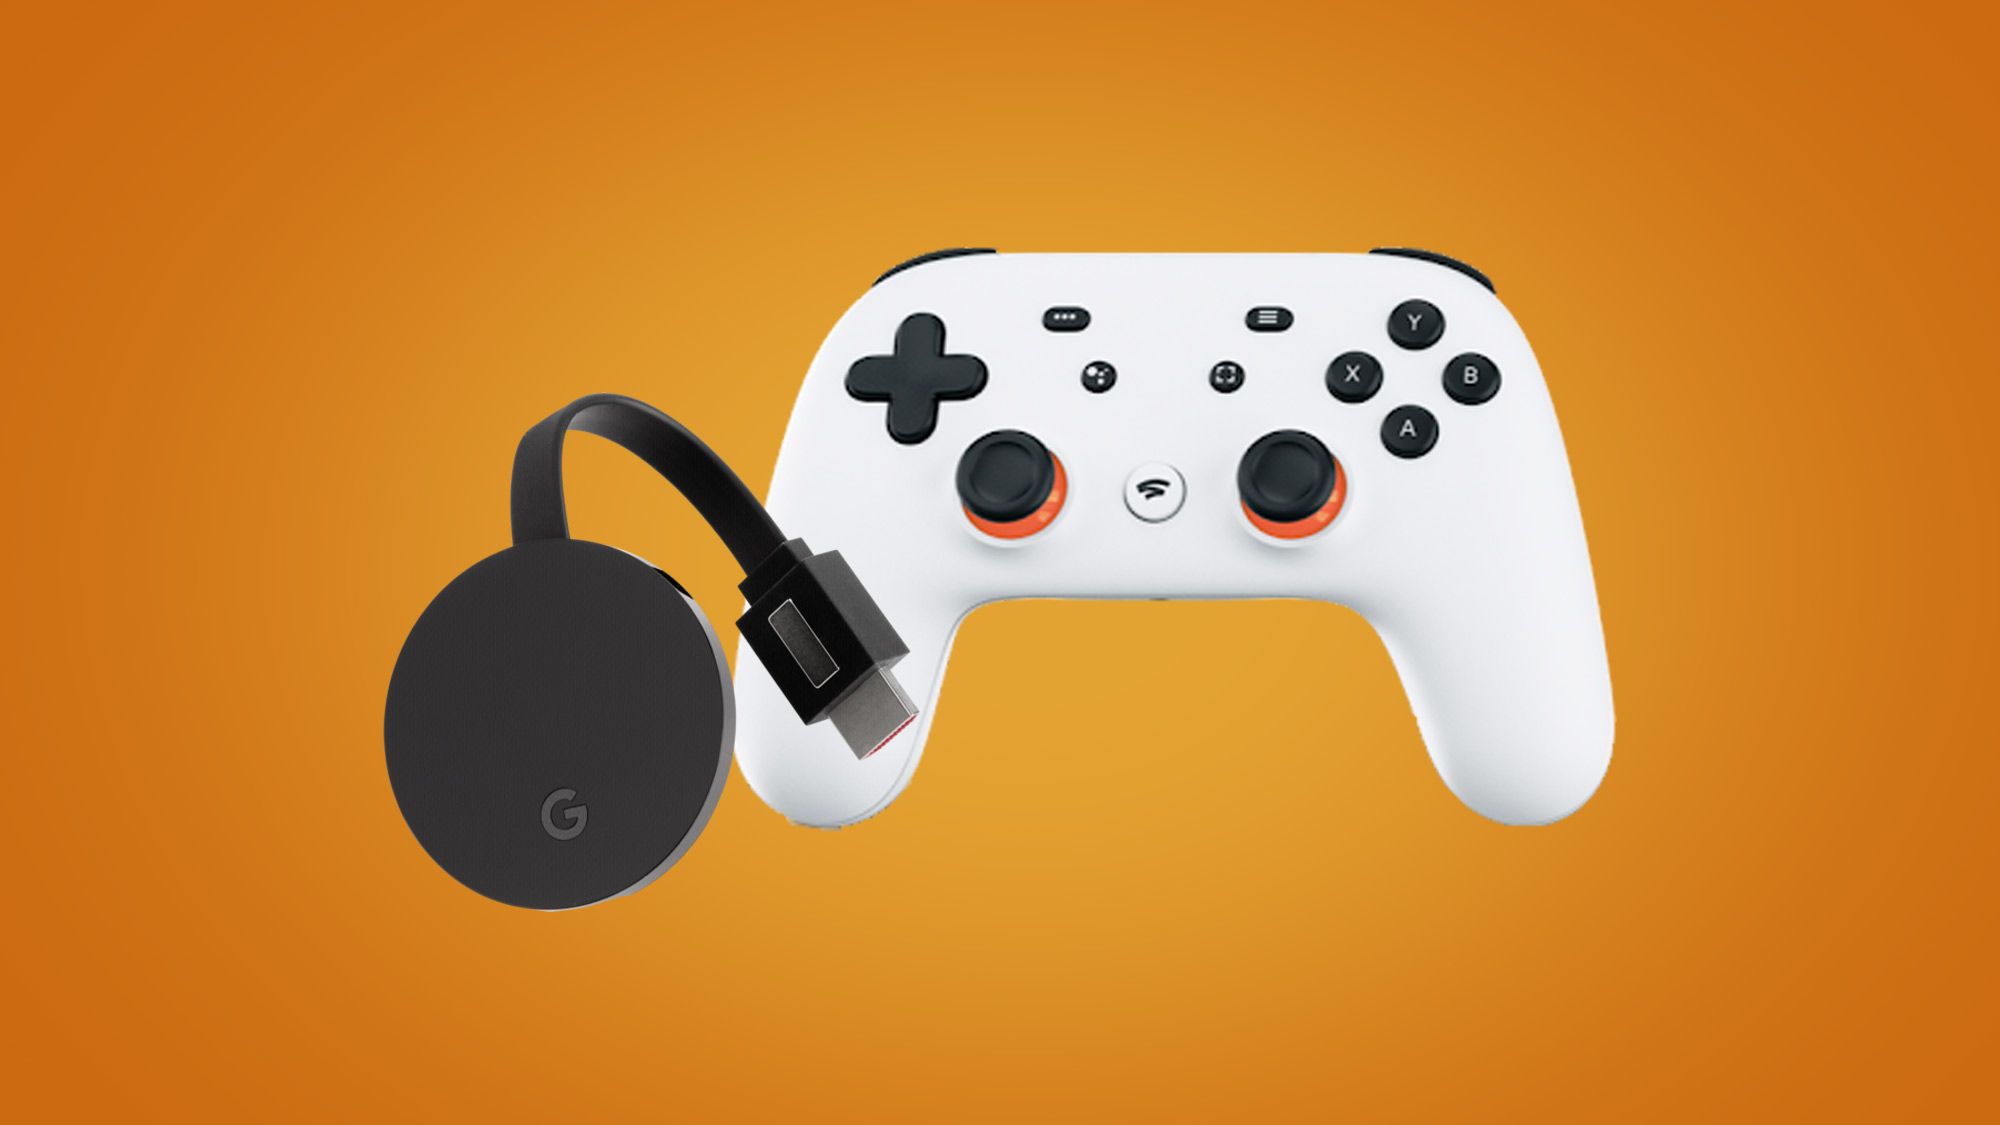 featured image - What is Cloud Gaming and How is Google Leading the Industry?